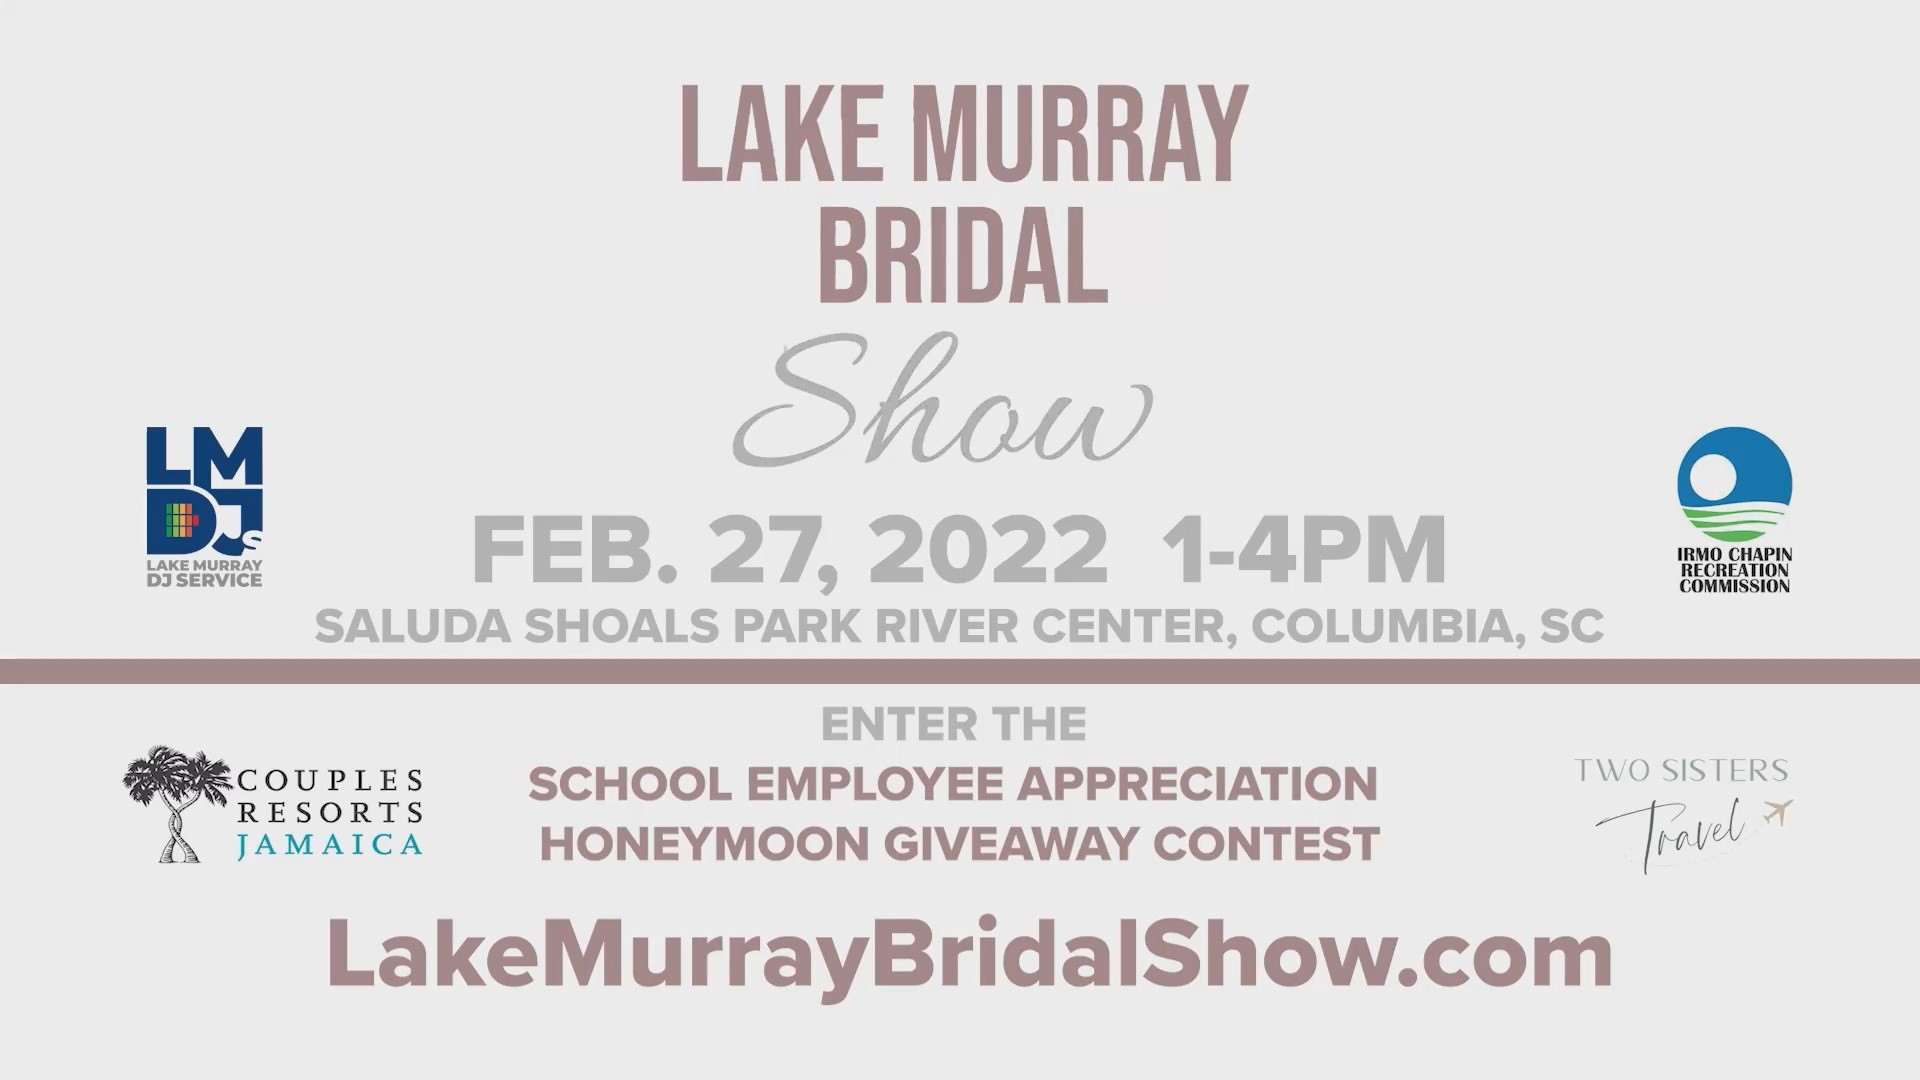 The Lake Murray Bridal Show “Season of Love” is today! Our exciting show of wedding professionals will help make your dream wedding a reality.